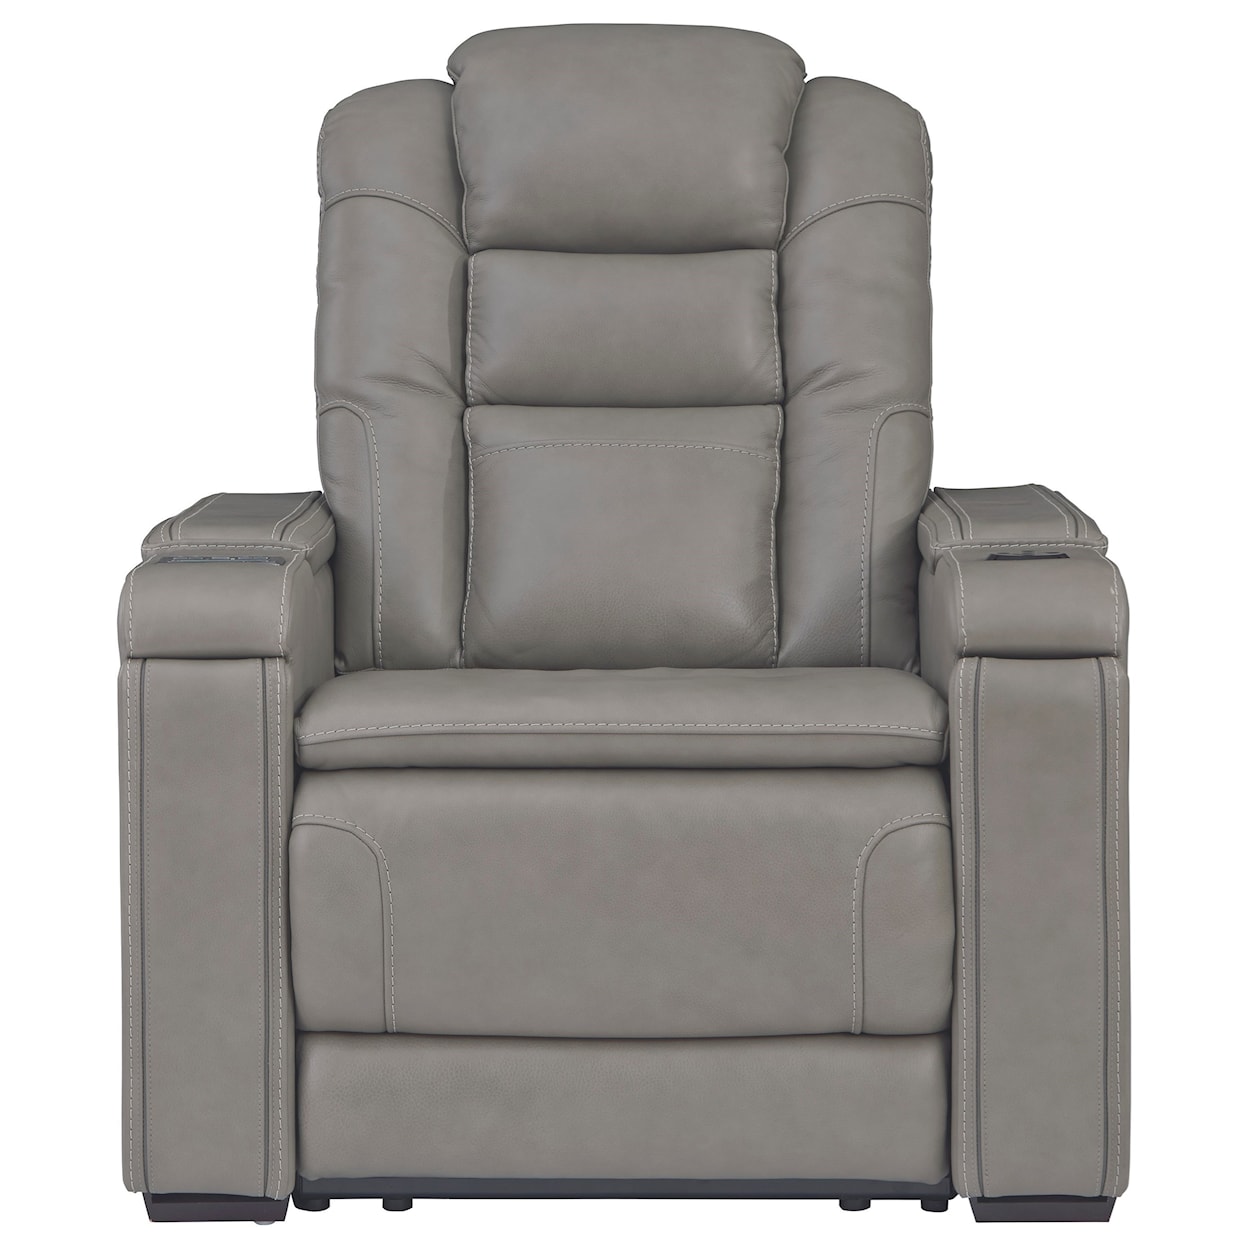 Signature Design by Ashley Furniture Boerna Power Recliner with Adjustable Headrest